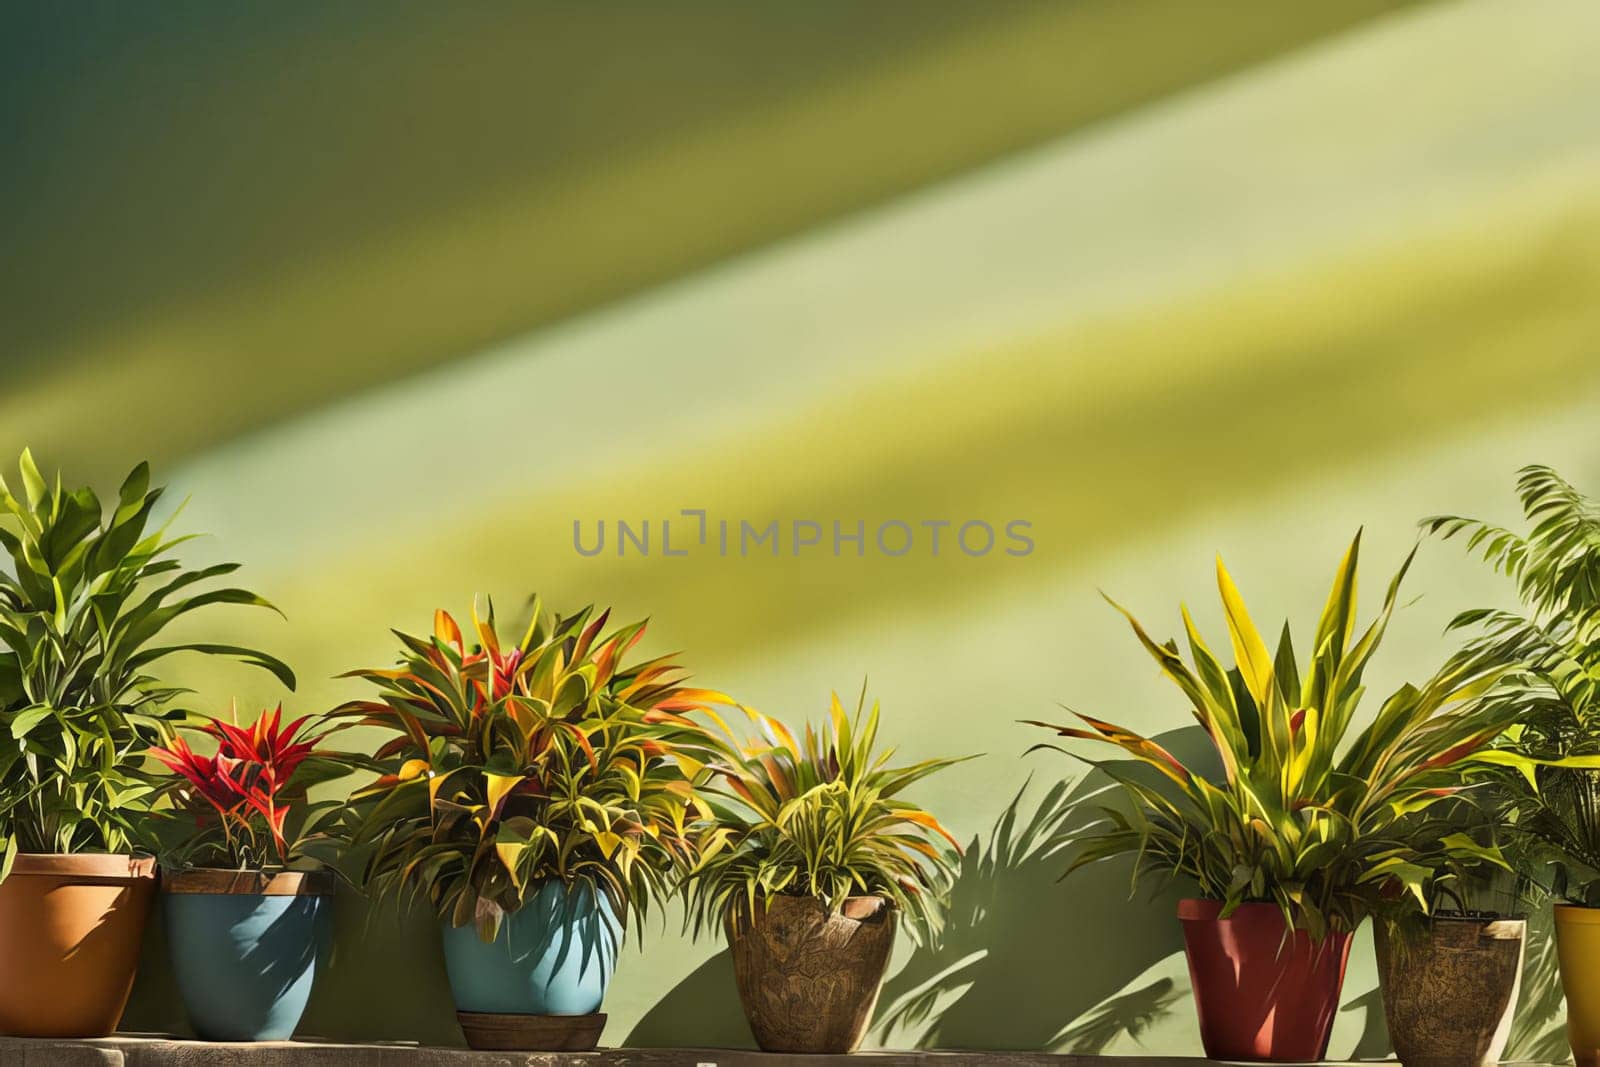 A row of vibrant tropical plants in colorful pots set against a bright blue wall. The lush greenery and bold, contrasting colors create a striking and lively composition